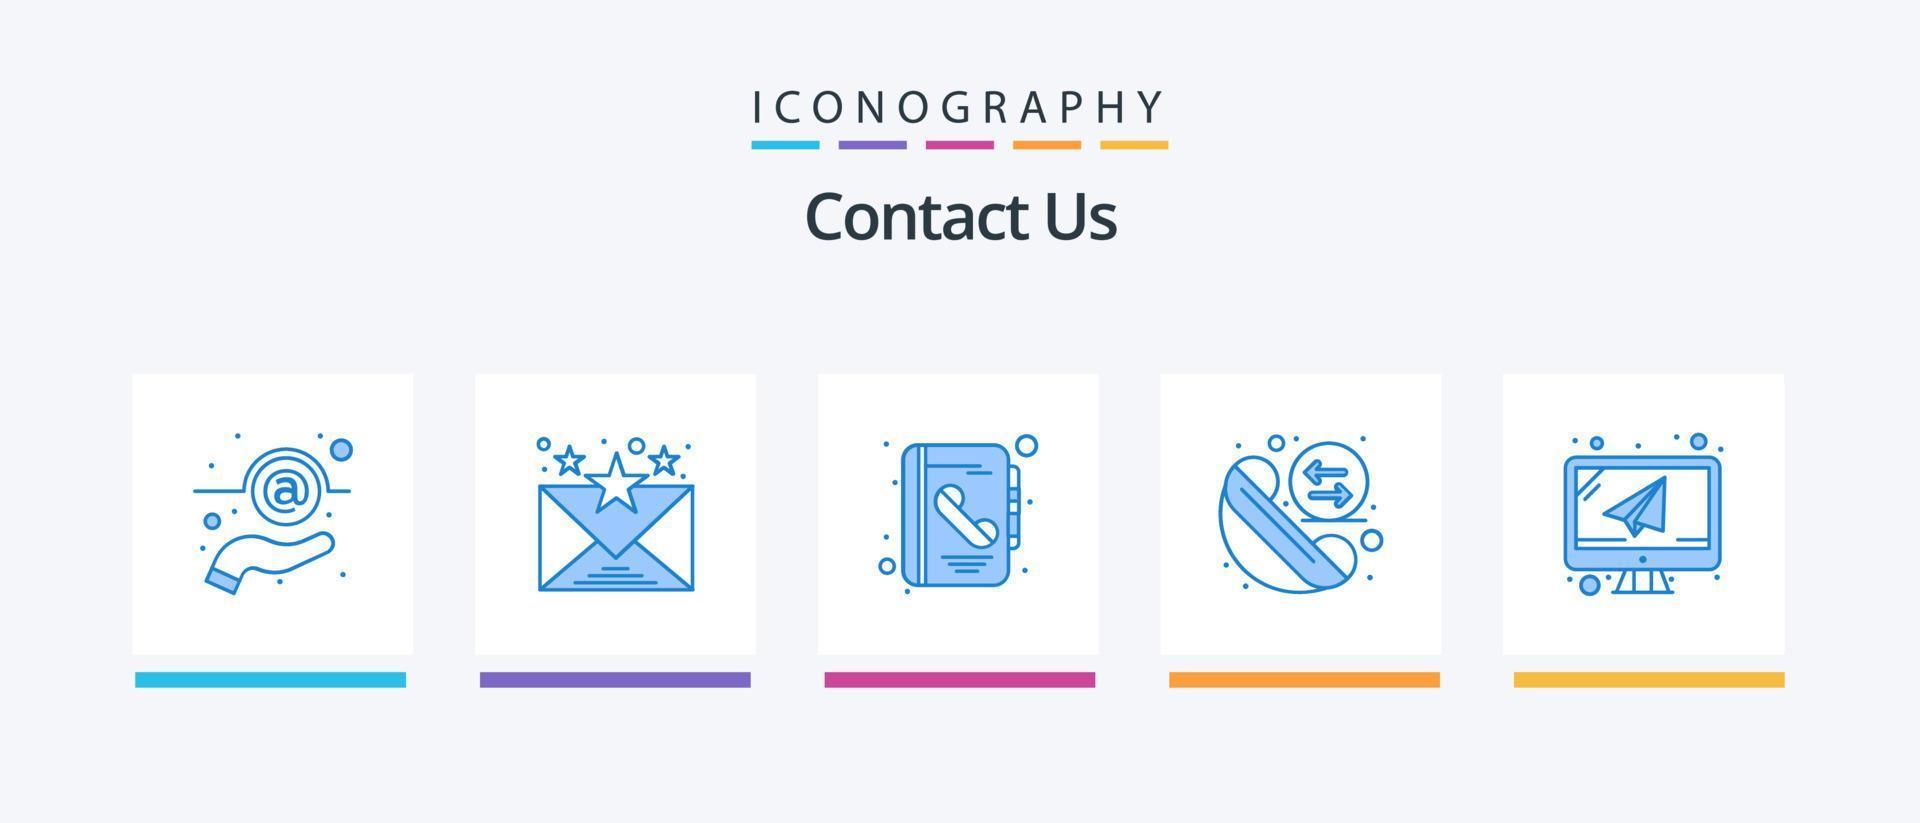 Contact Us Blue 5 Icon Pack Including laptop. computer. book. redial. exchange. Creative Icons Design vector